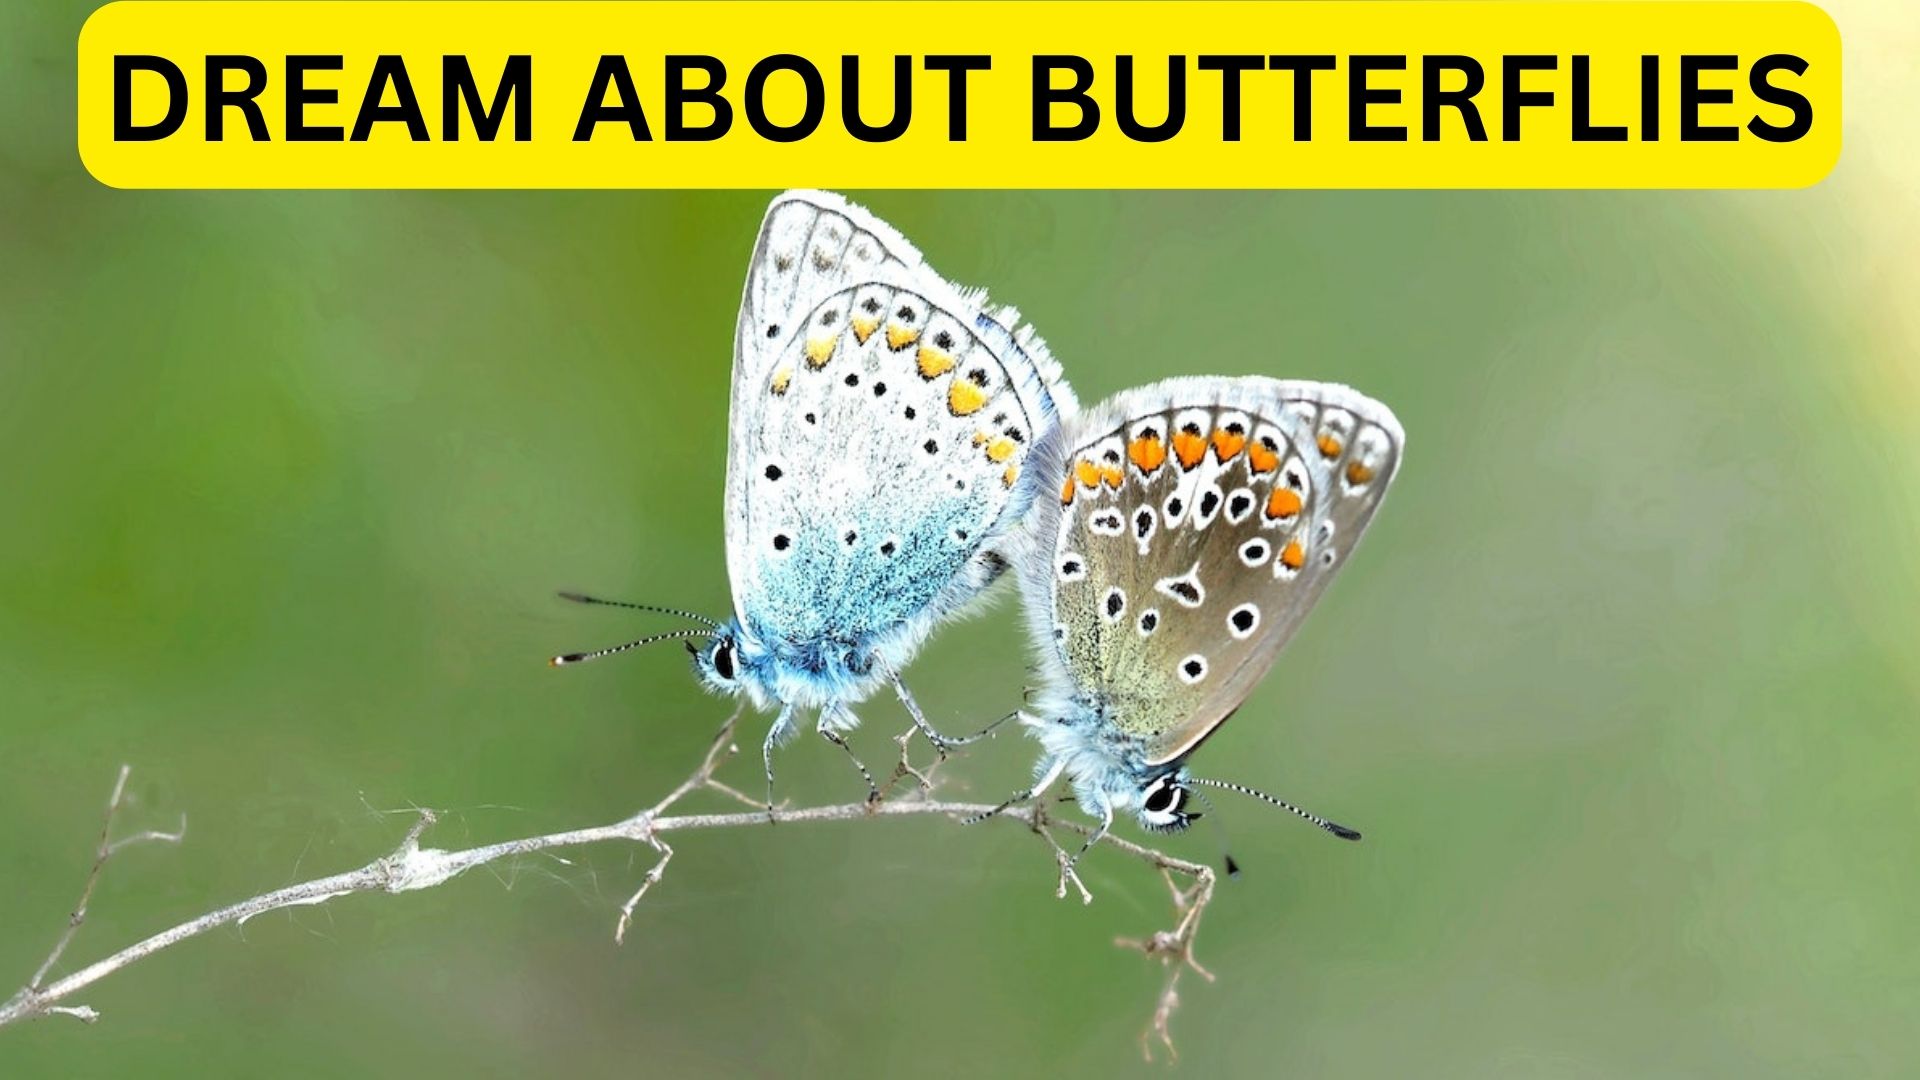 Dream About Butterflies Meaning - Related To Transformation